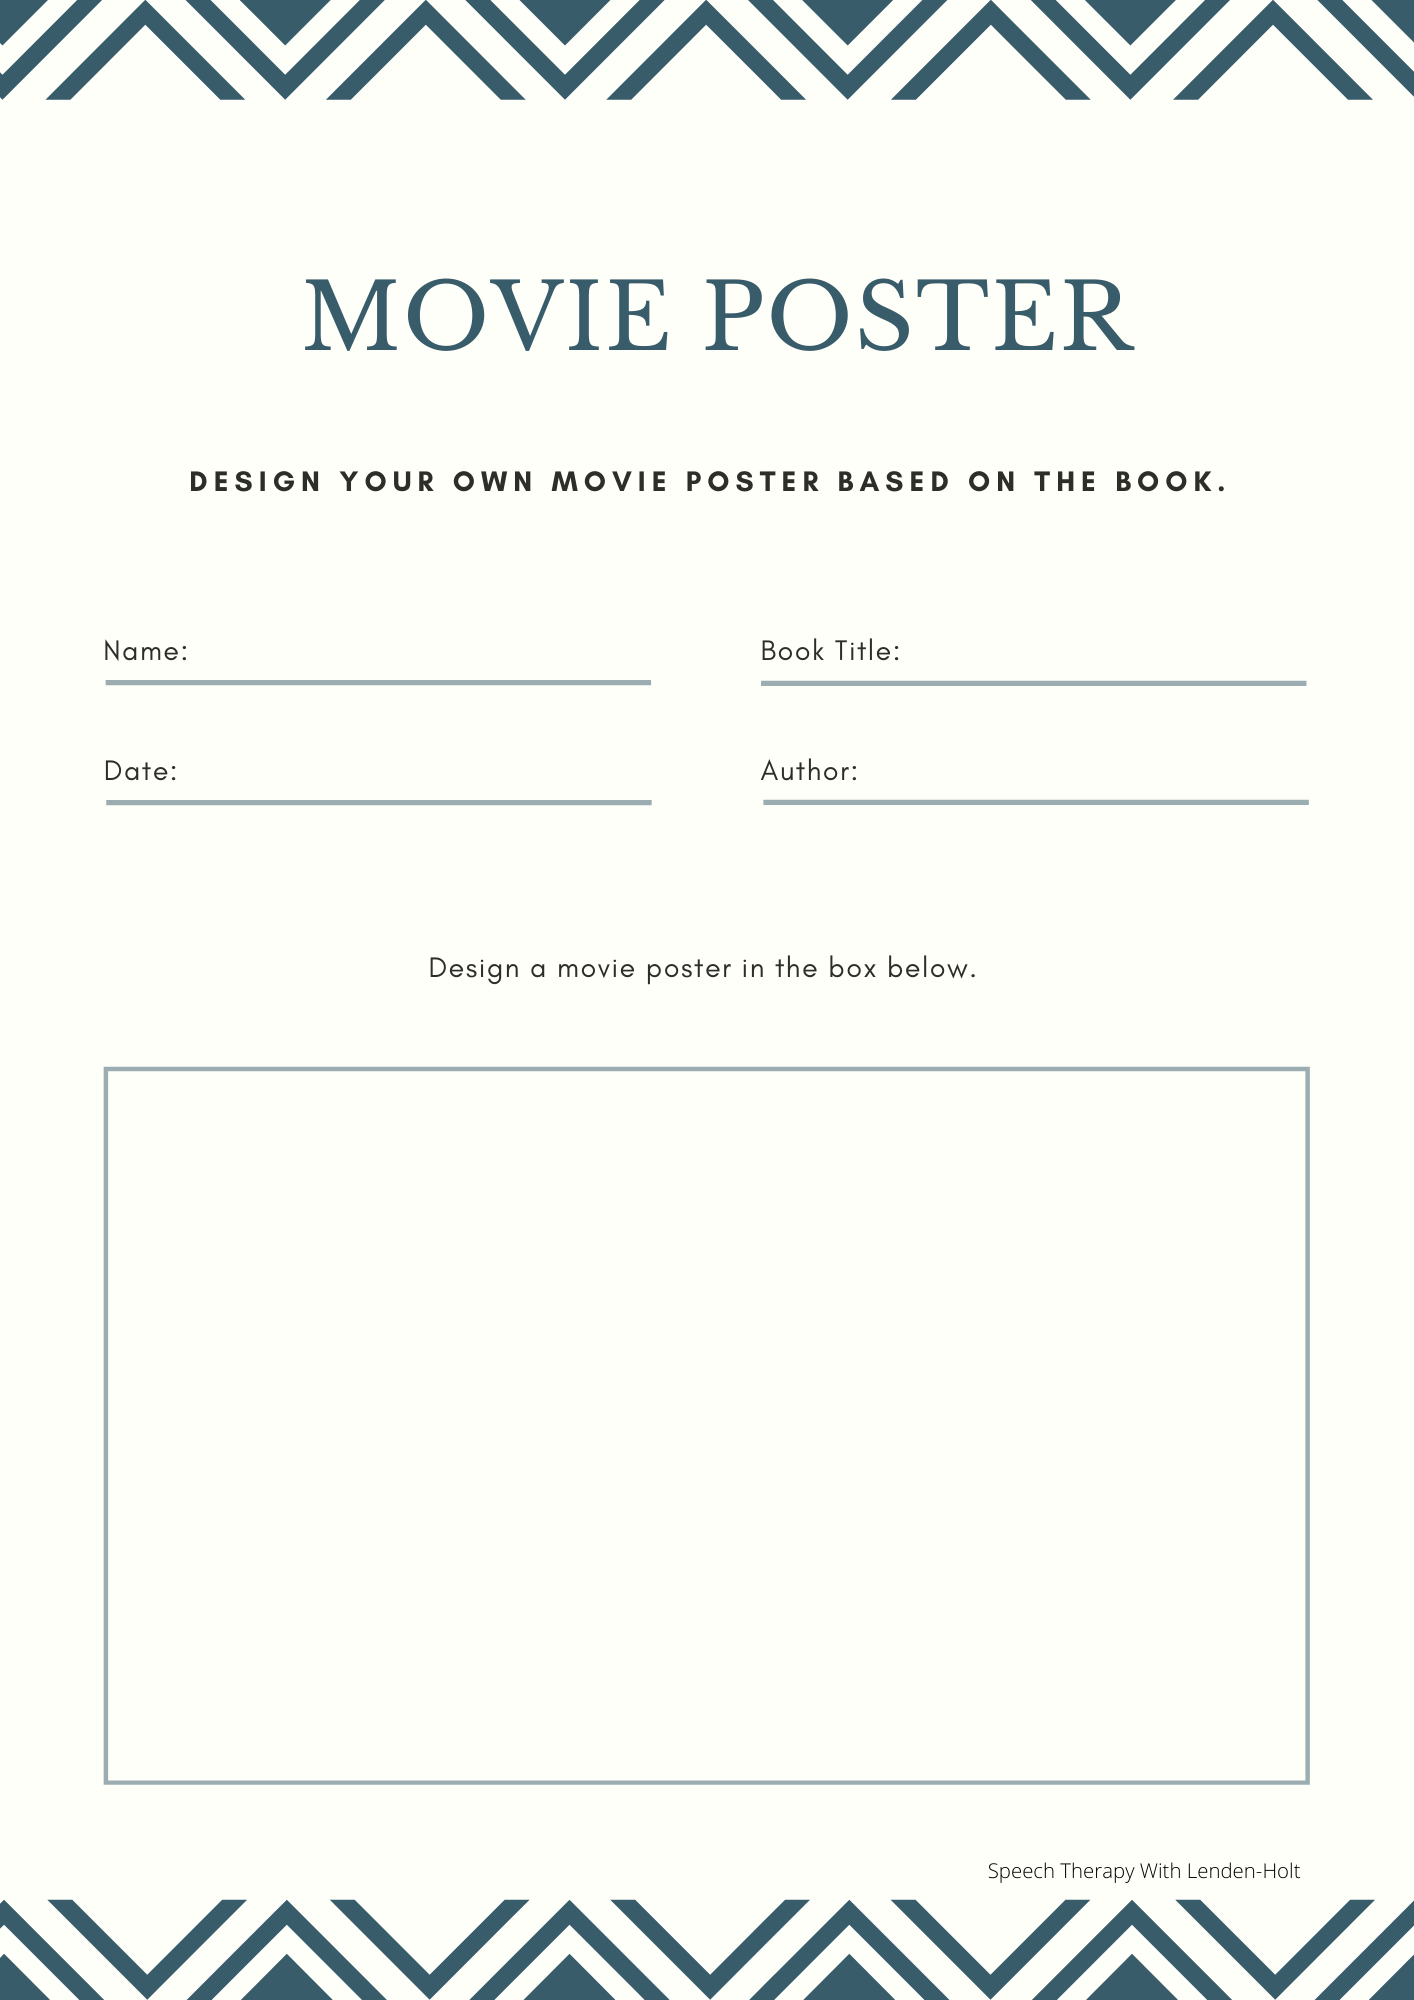 Design Your Own Movie Poster Template image